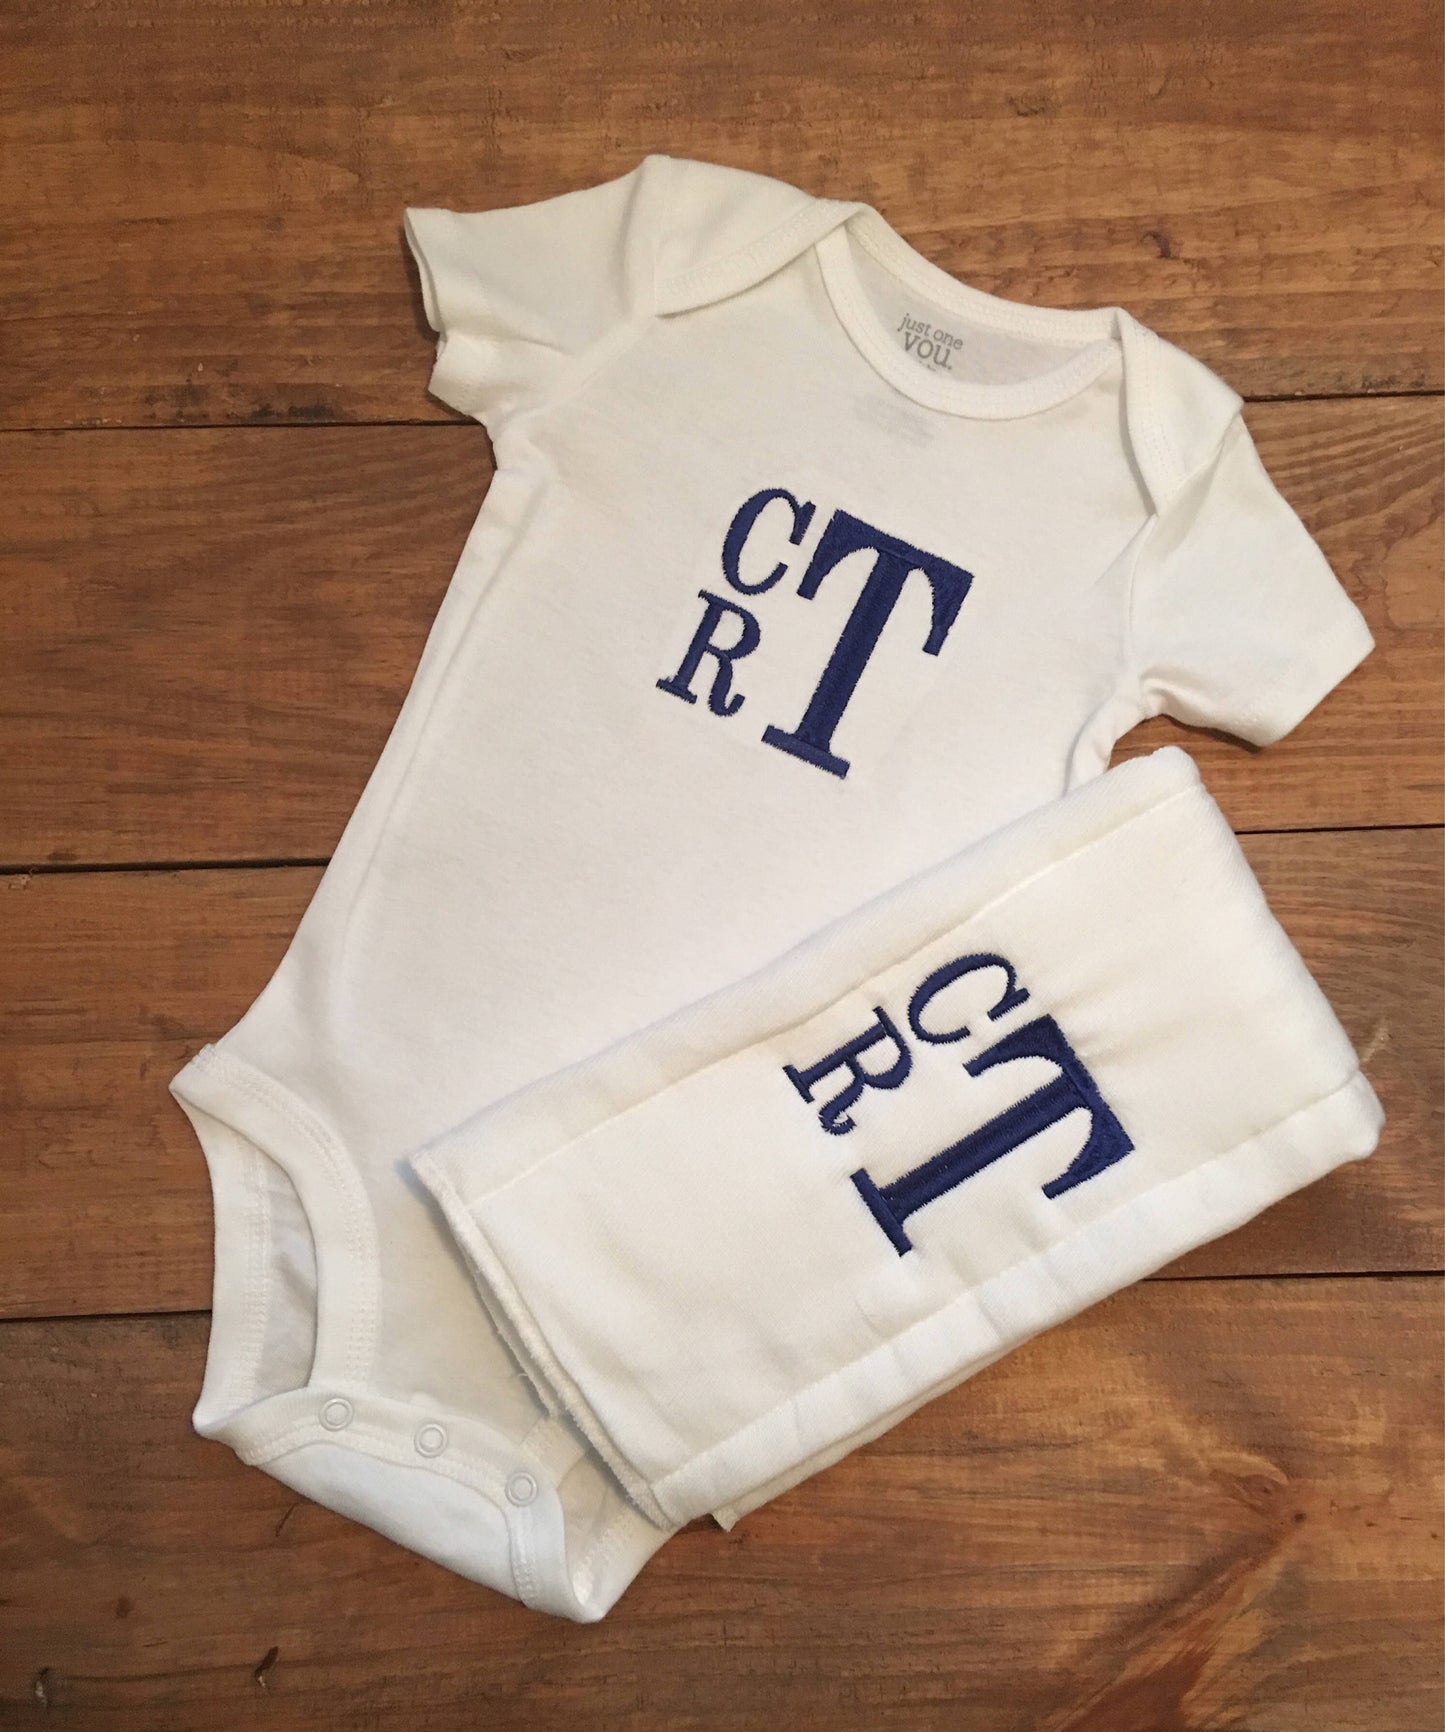 Baby boys stacked monogrammed bodysuit and burp set- boys monogrammed baby shower gift - boys monogrammed bodysuit - monogrammed burp cloth